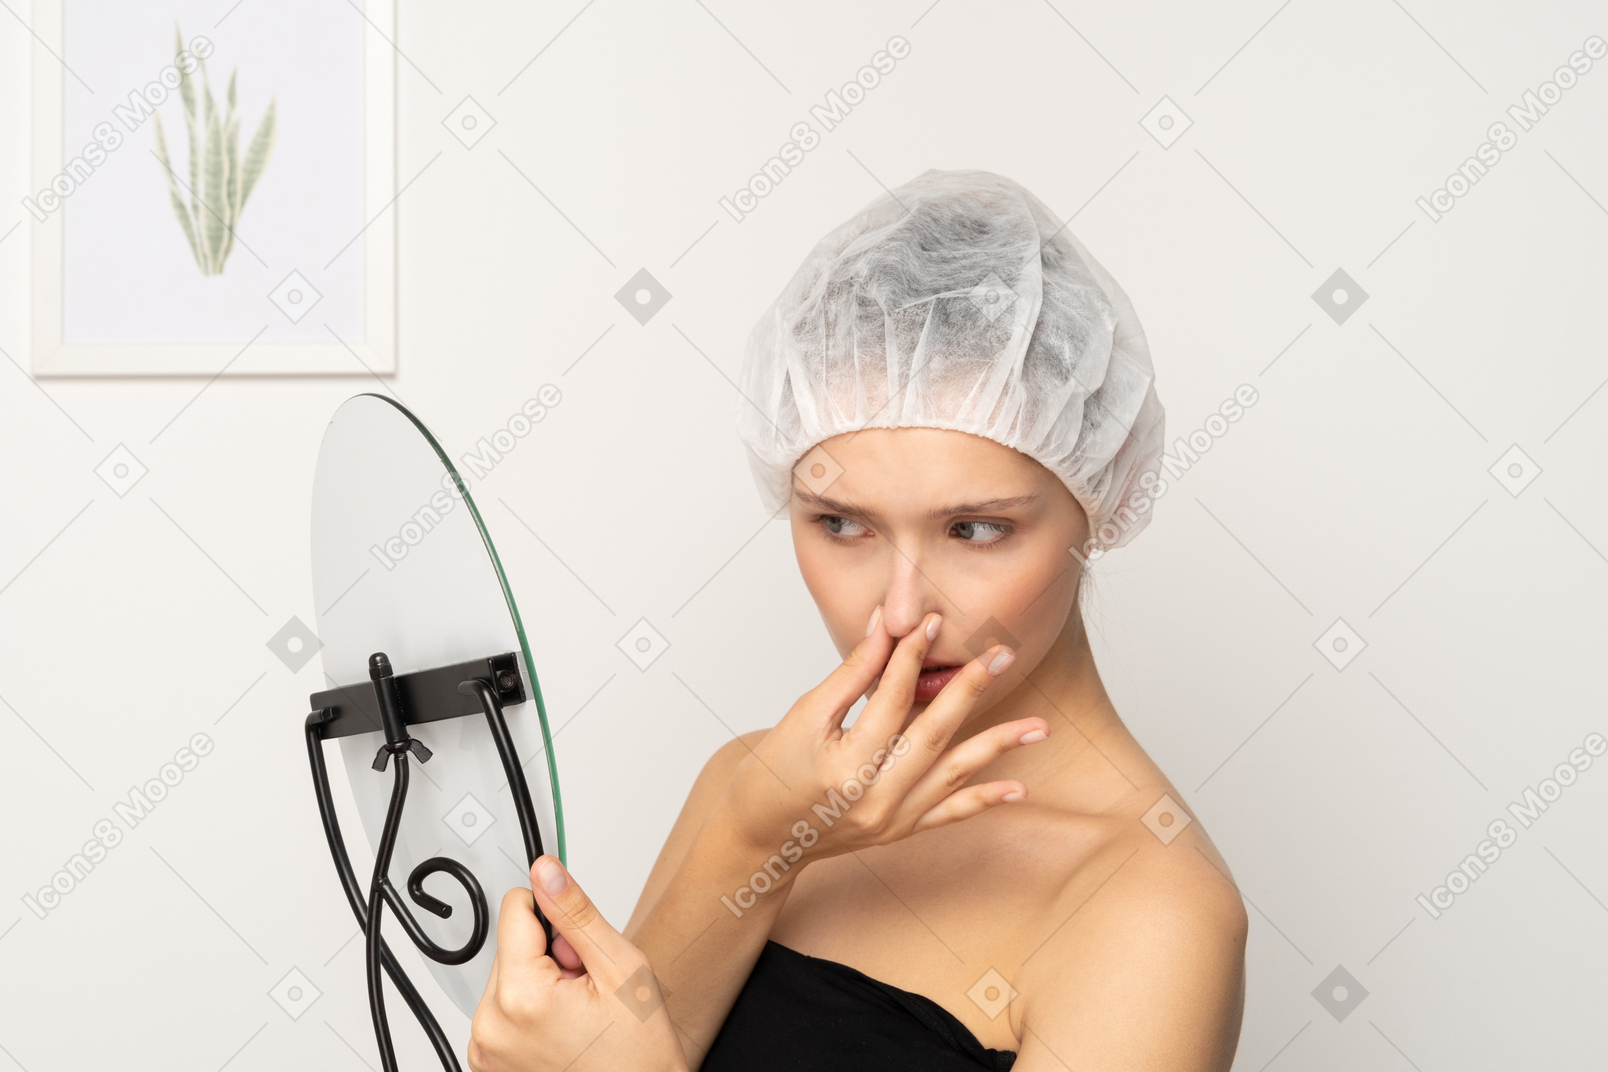 Unhappy woman in surgical cap looking in the mirror and touching her nose